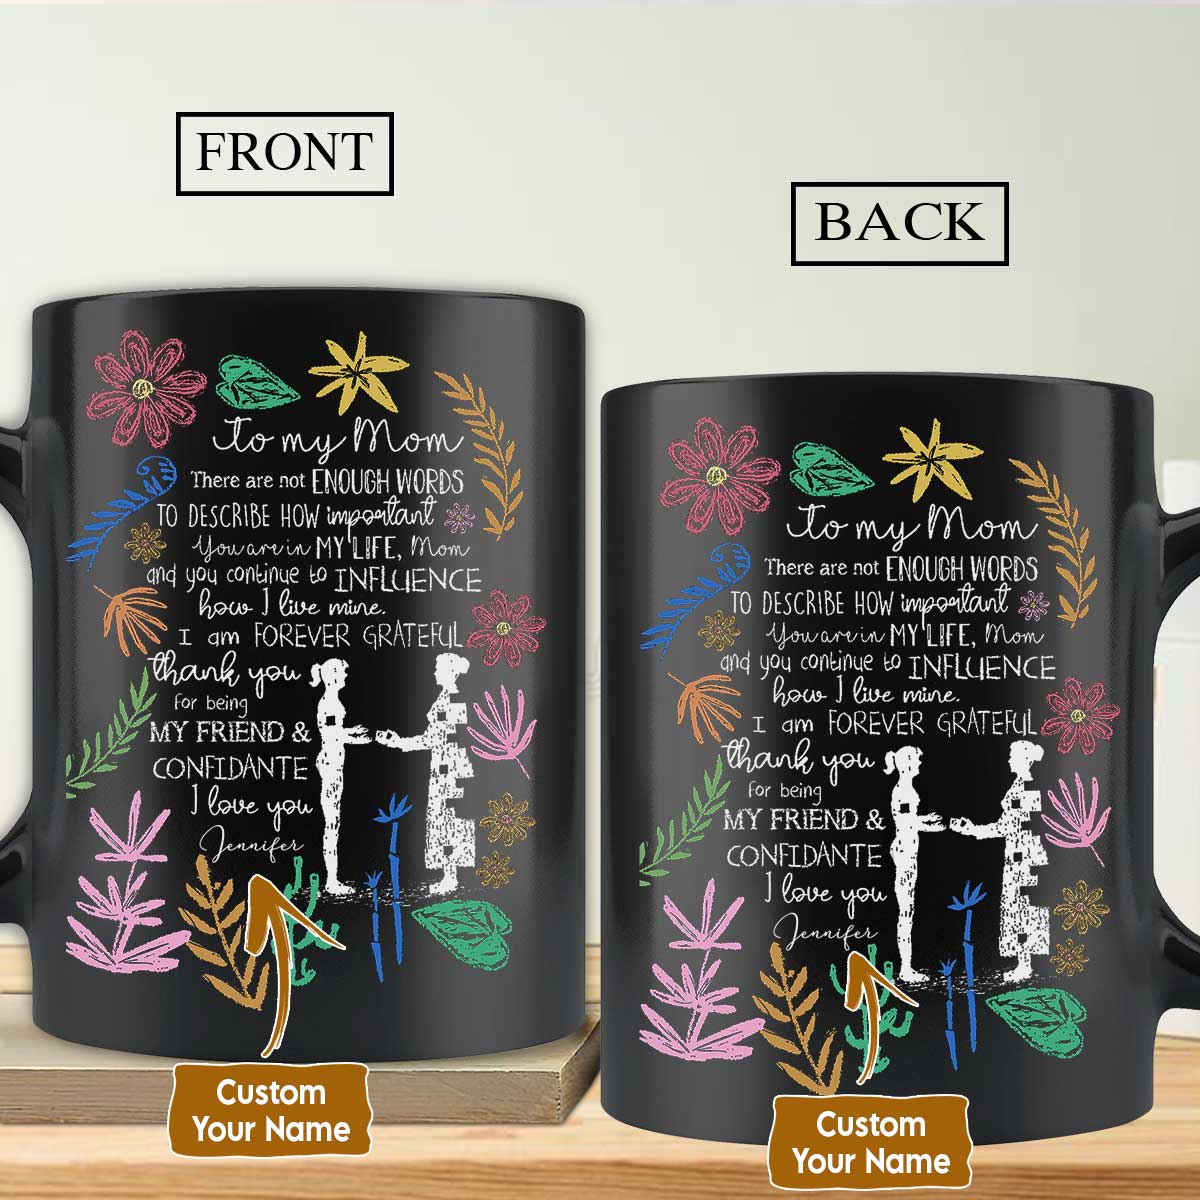 Gift For Mom Personalized Mug - Daughter to mom, Flower frame Mug - Custom Gift For Mother's Day, Presents for Mom -Being my friend and confidante Mug